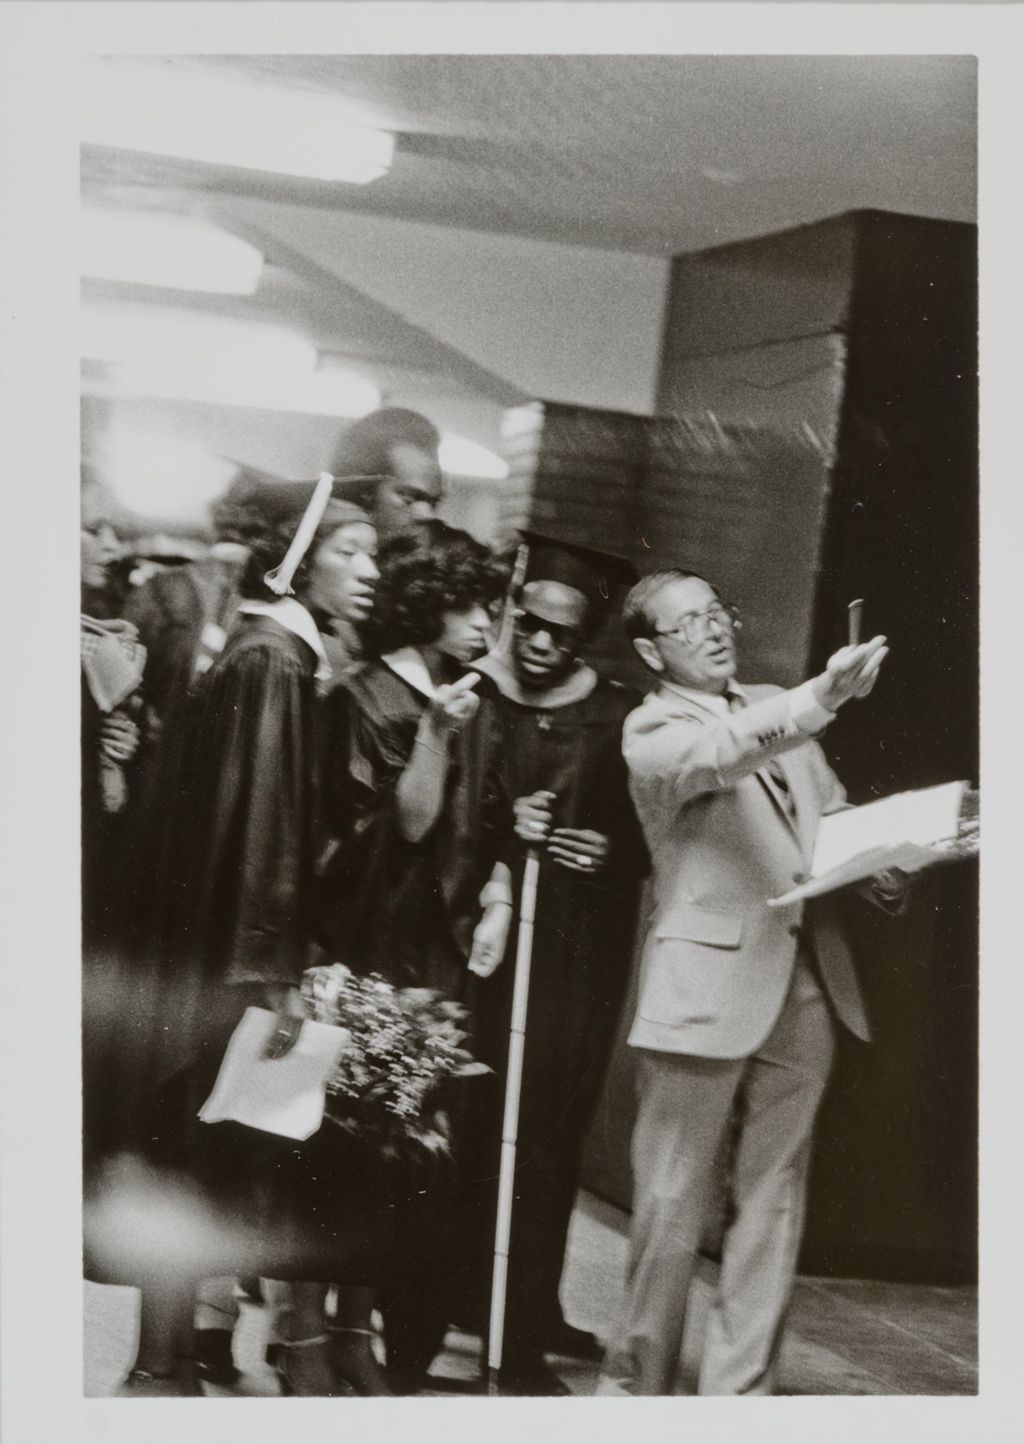 Miniature of Dean of the College of Kinesiology, Charles J. Kristufek, and graduating students at graduation